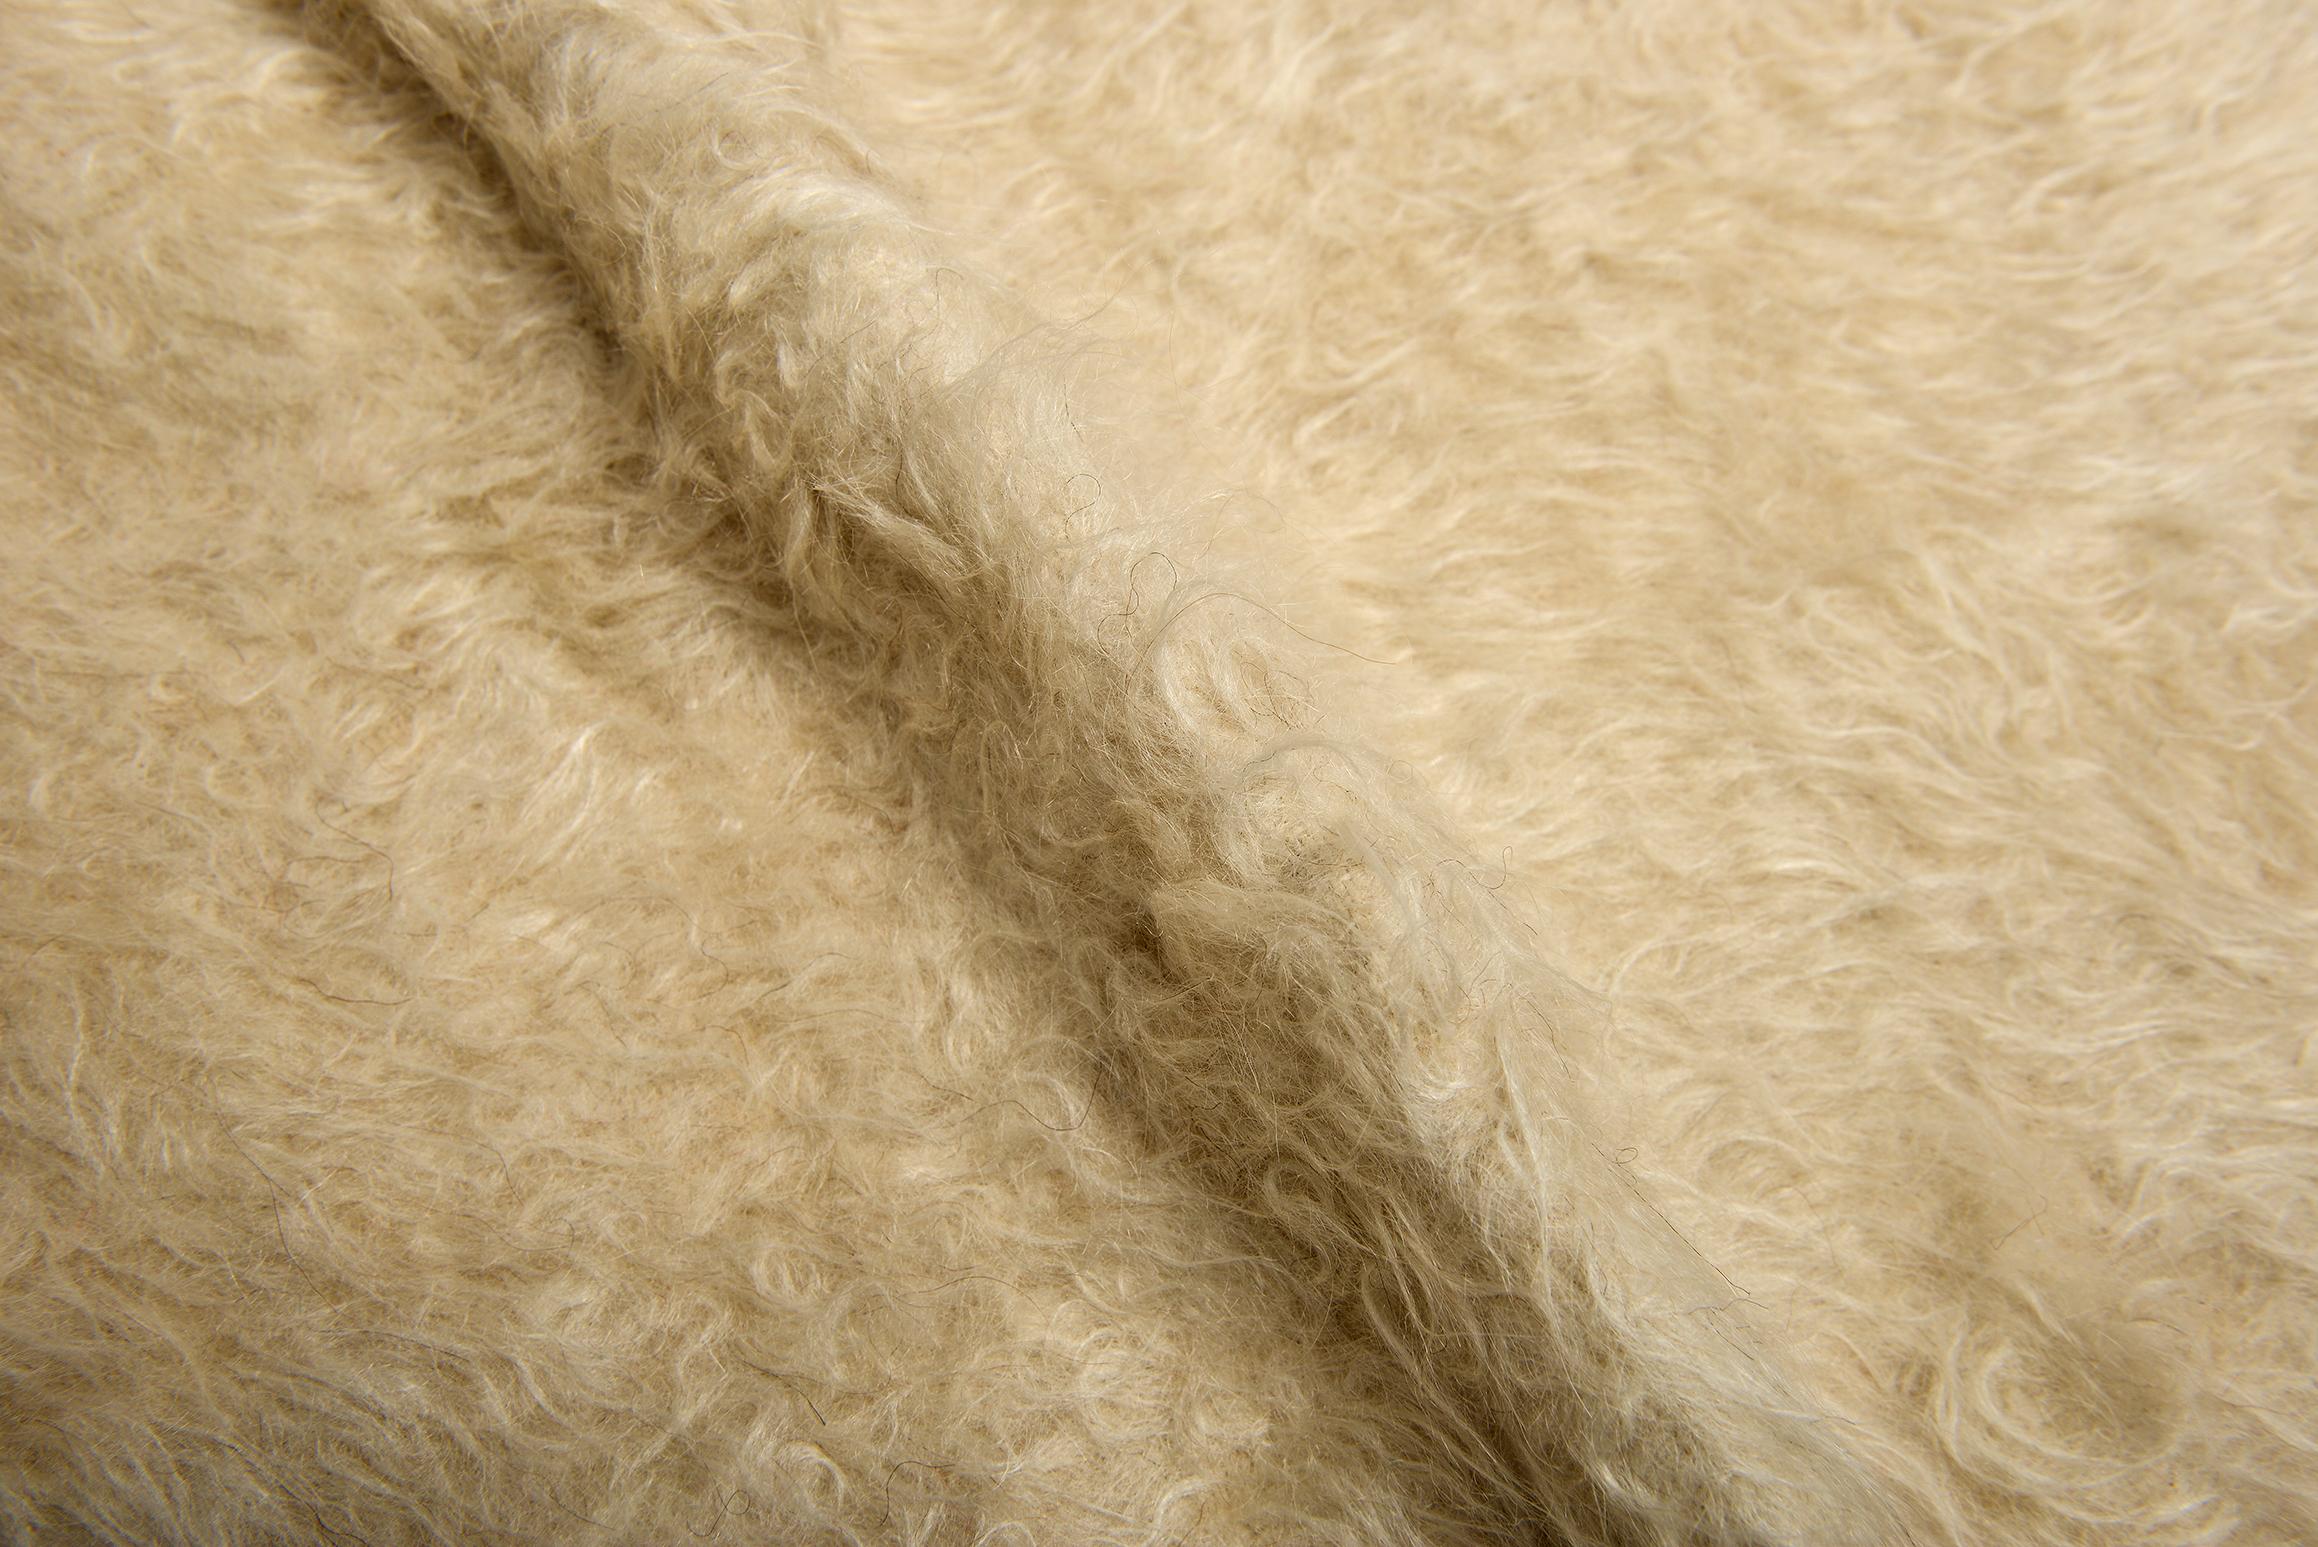 Hand-Knotted White Mohair Wool  SIIRT Weaving Carpet